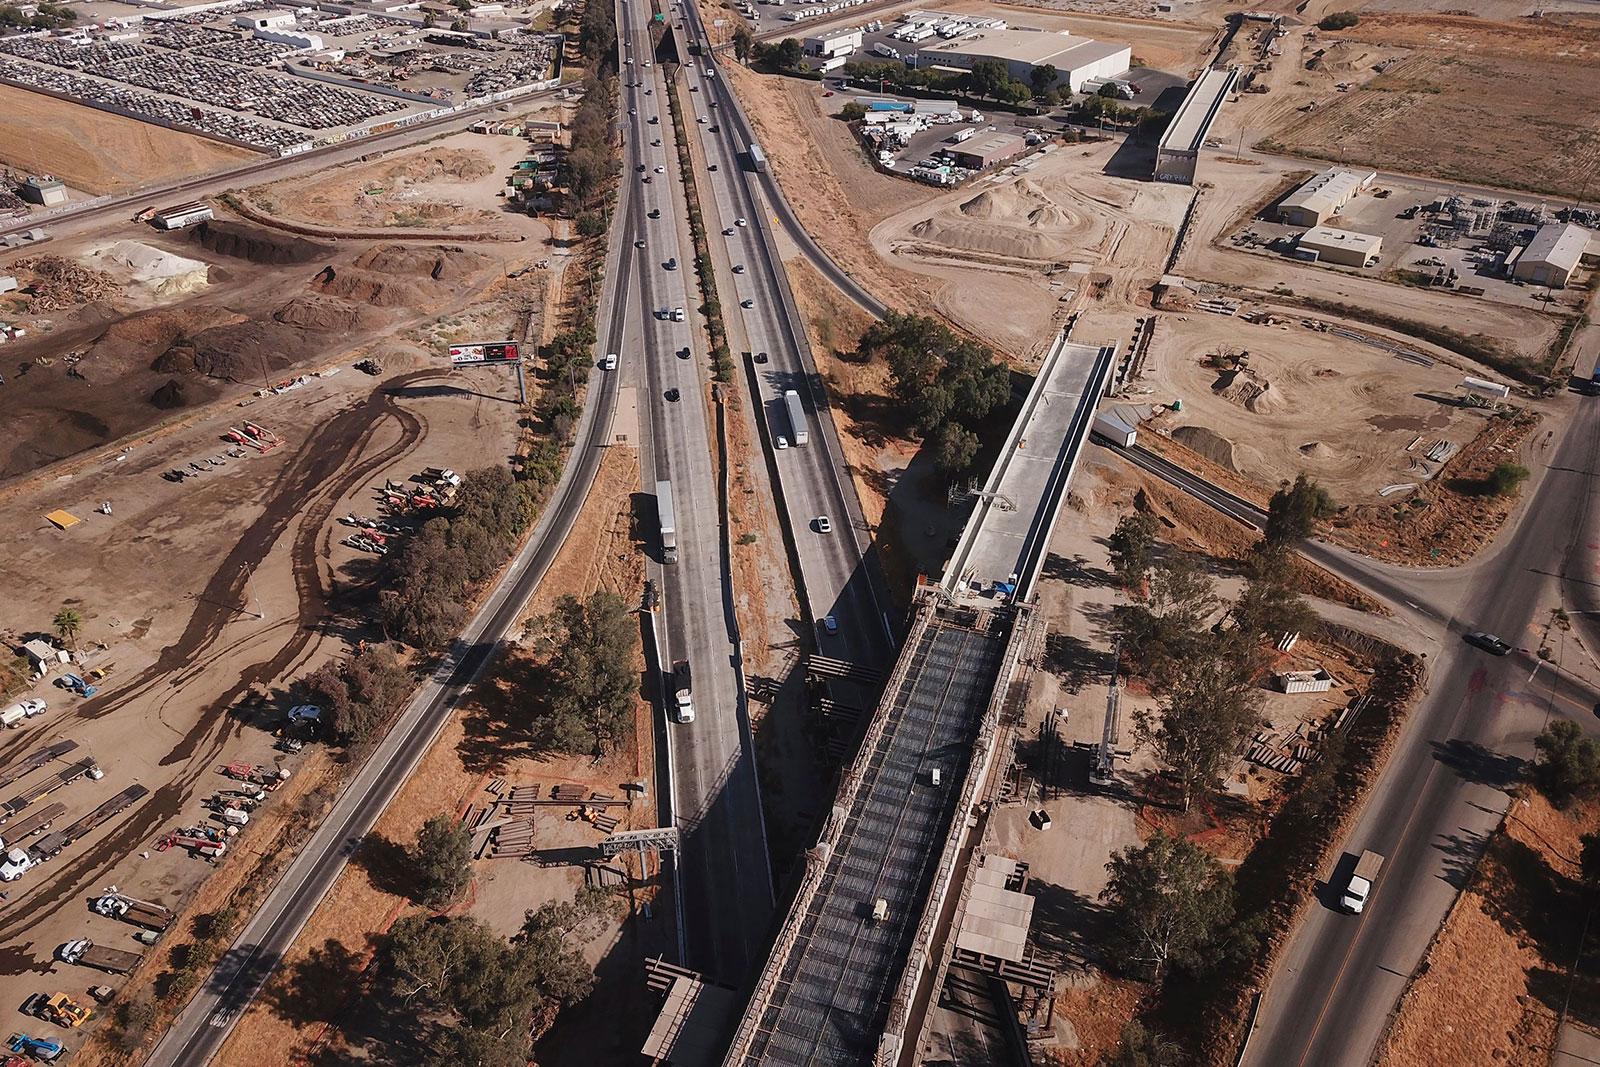 A high-speed rail line is constructed over a highway in Fresno, California, on August 26.